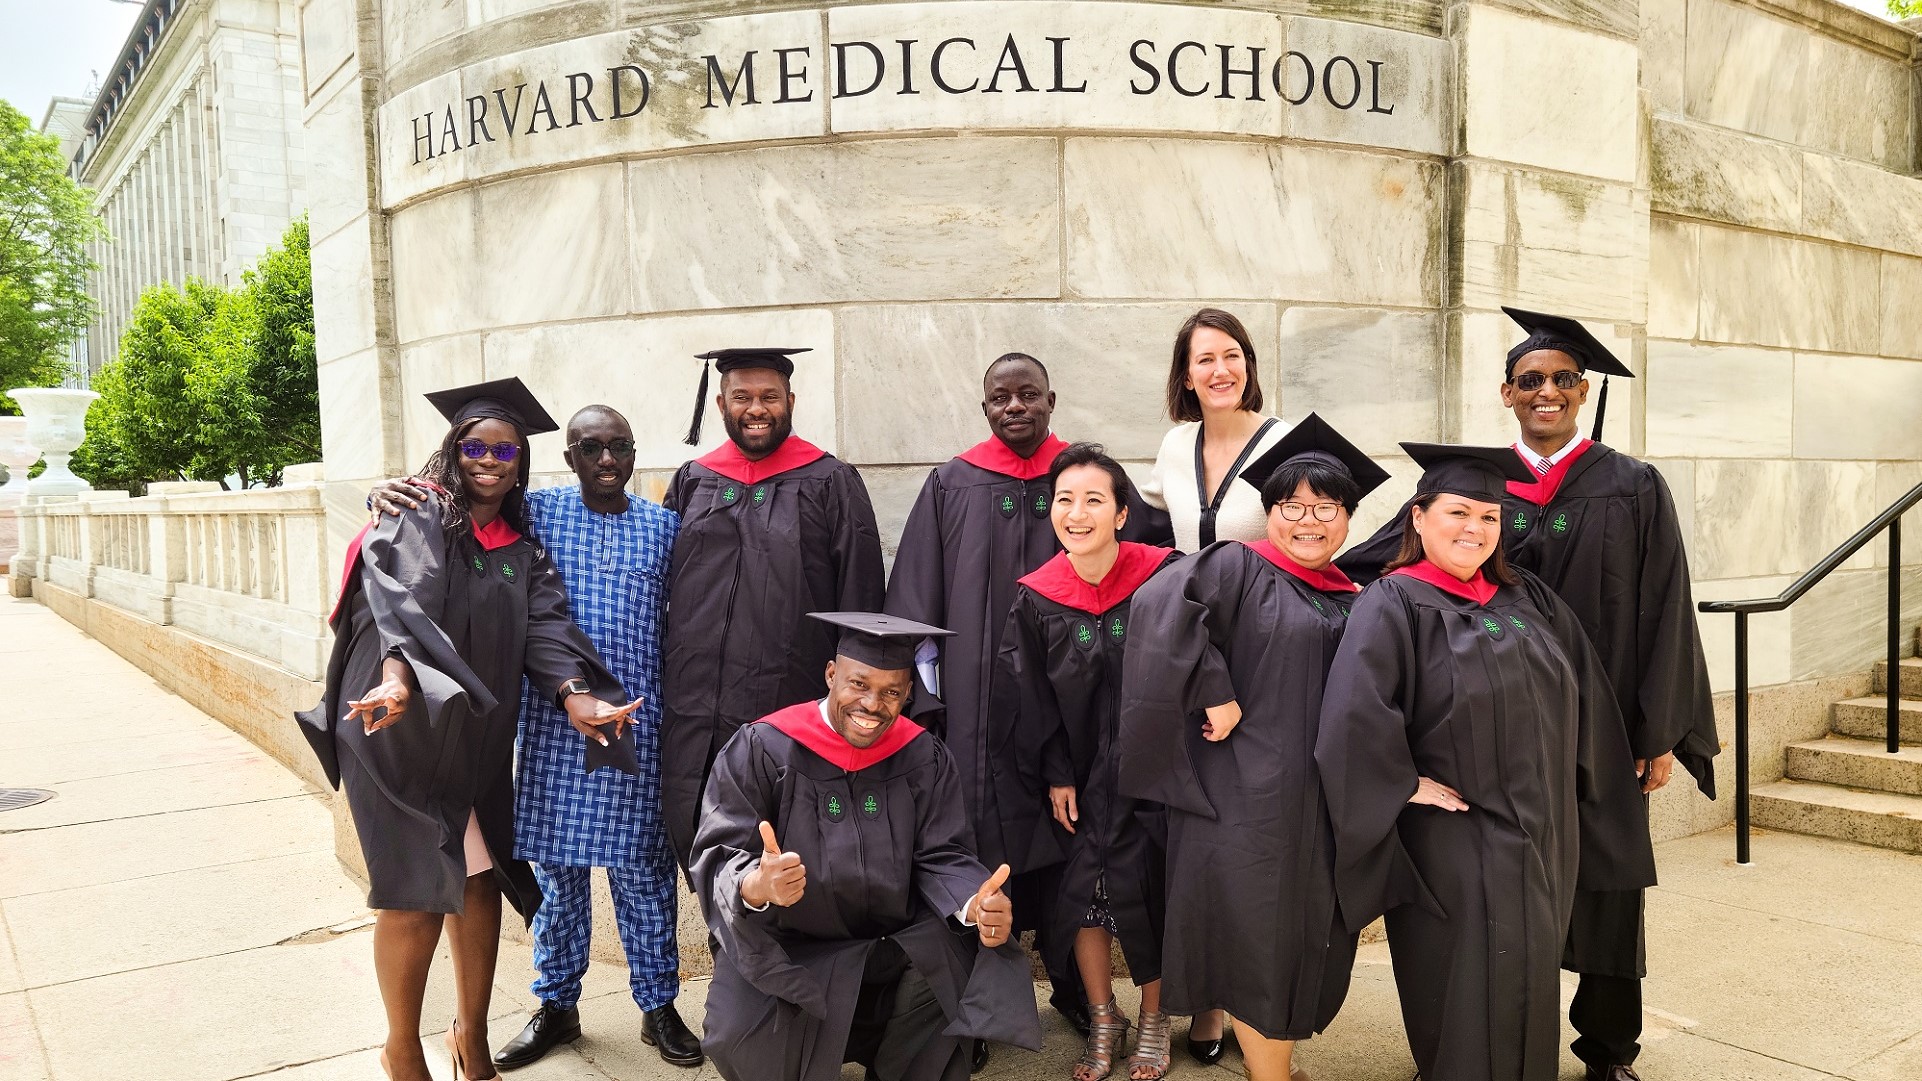 MMSc-GHD Class of 2020 in crimson and black regalia outside of Harvard Medical School marble wall